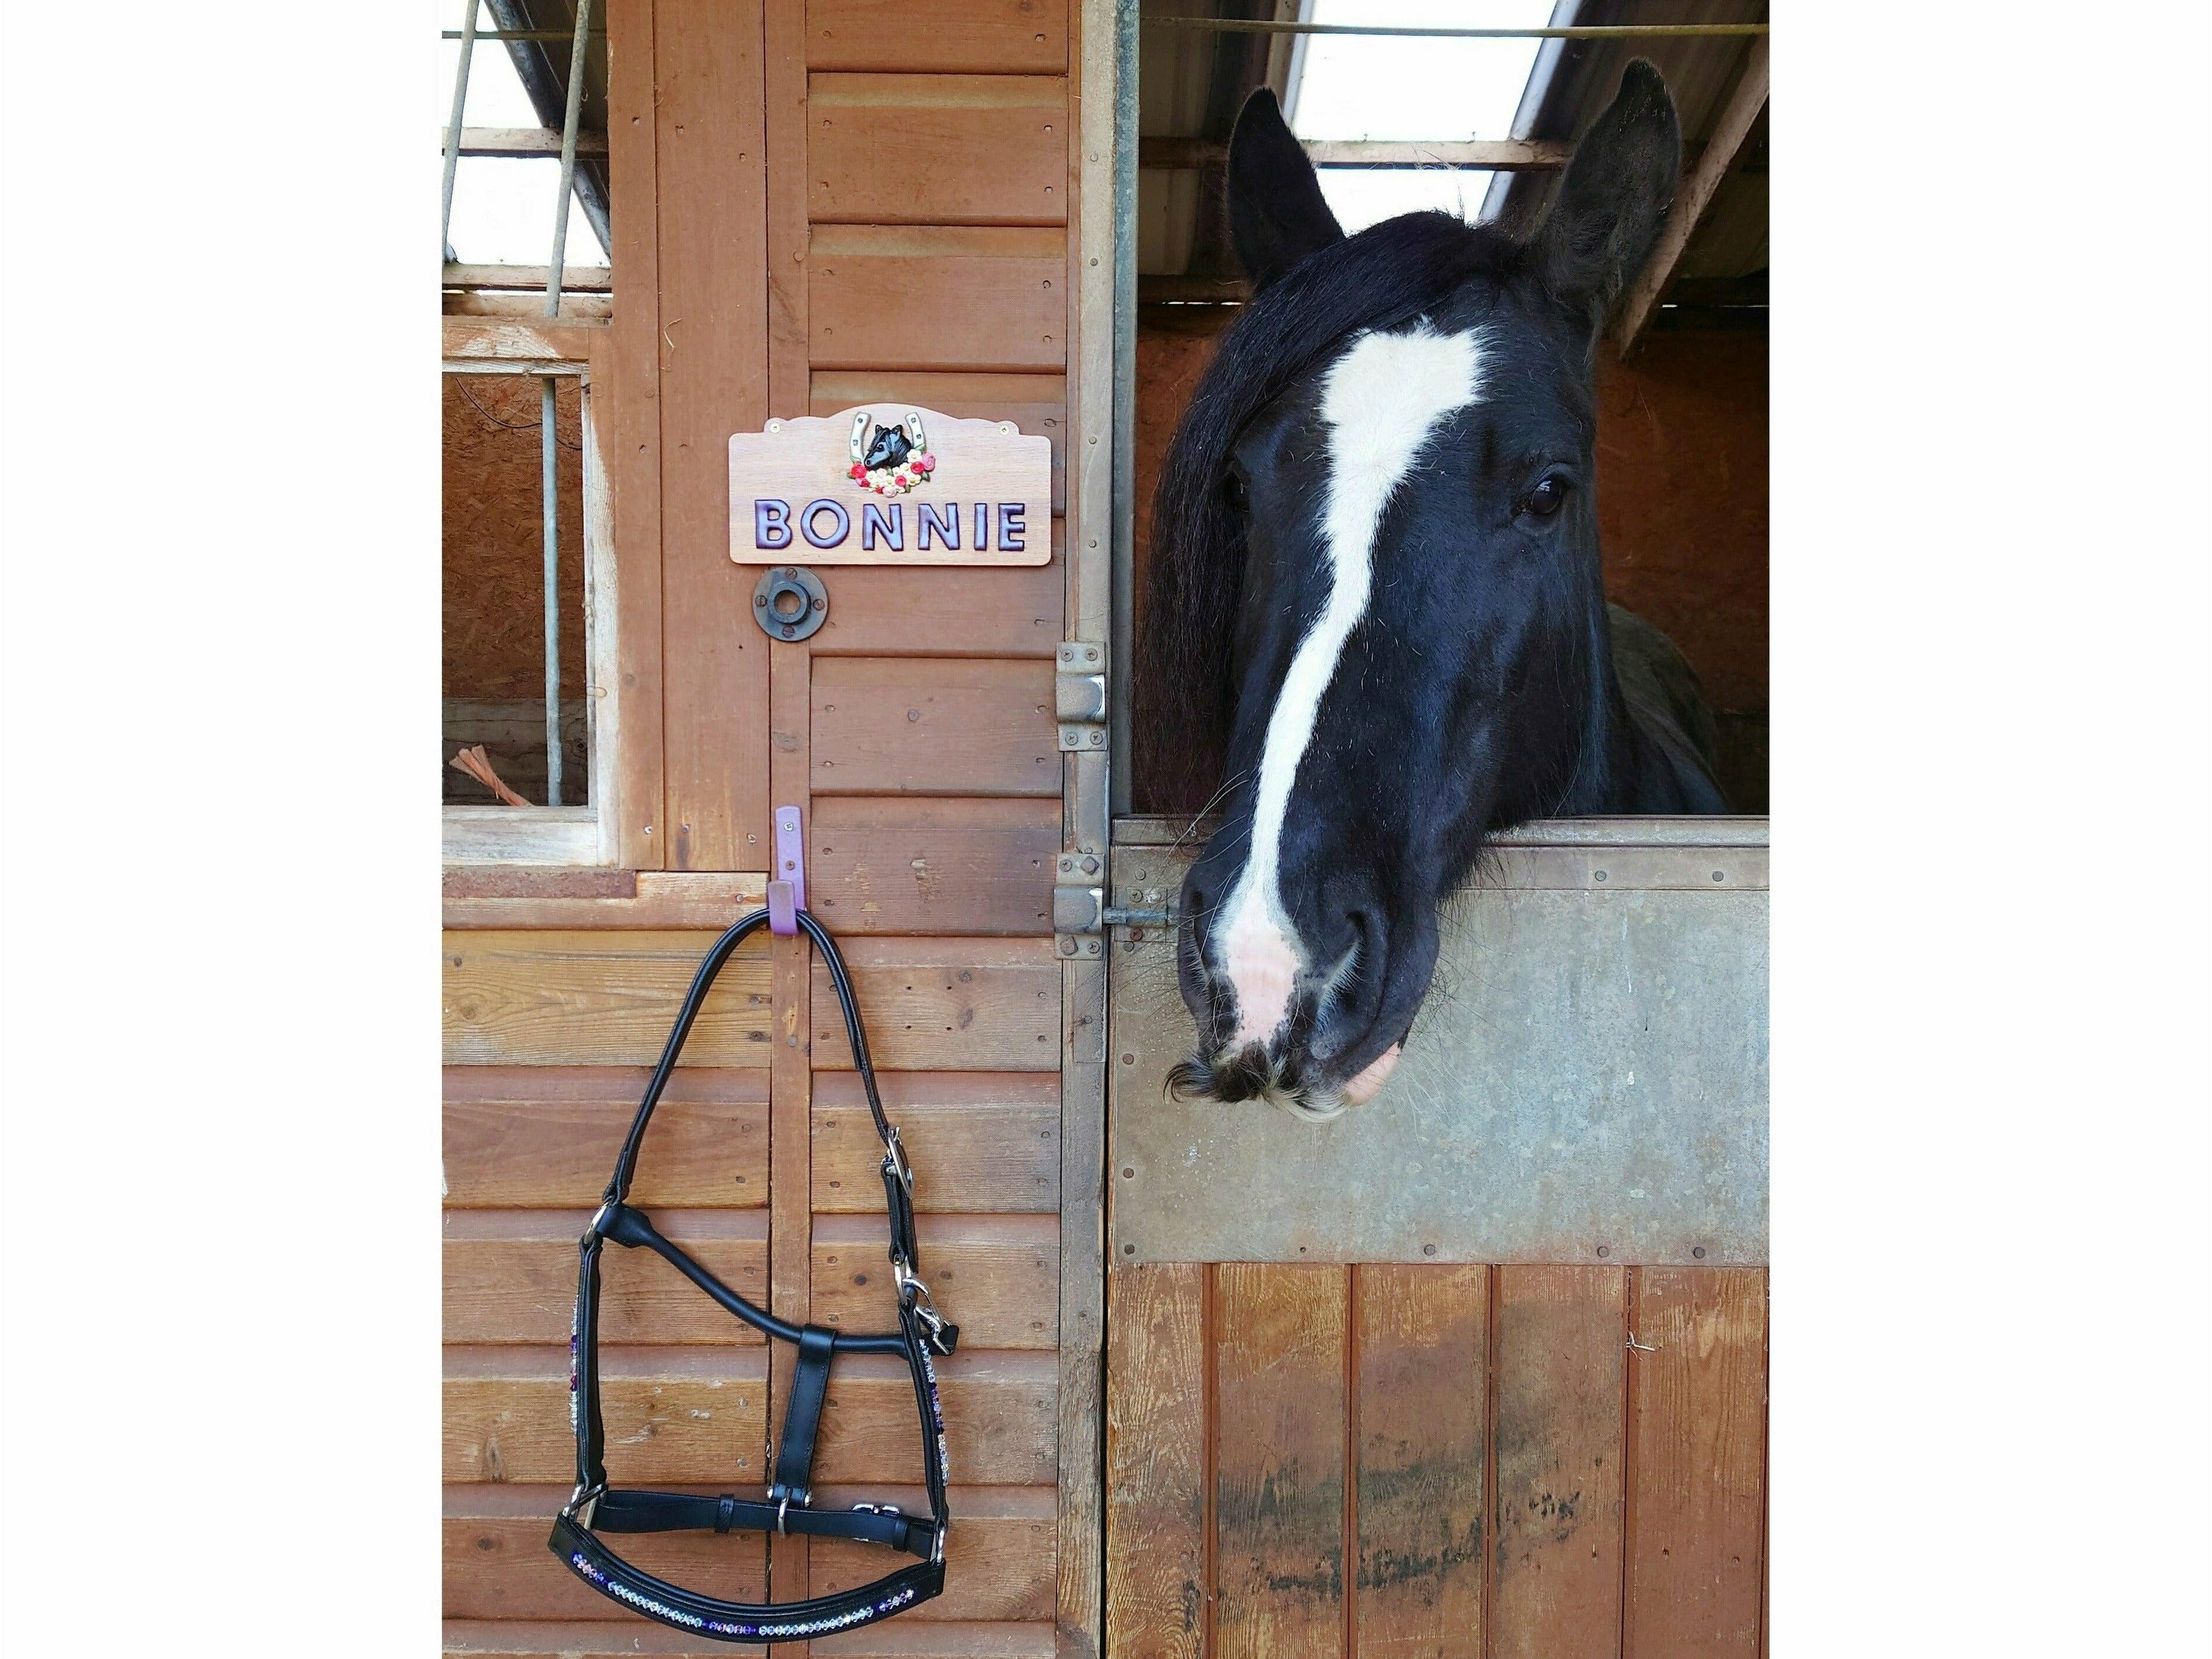 Daisy-Chain Equestrian Personalised Stable Door Plaque